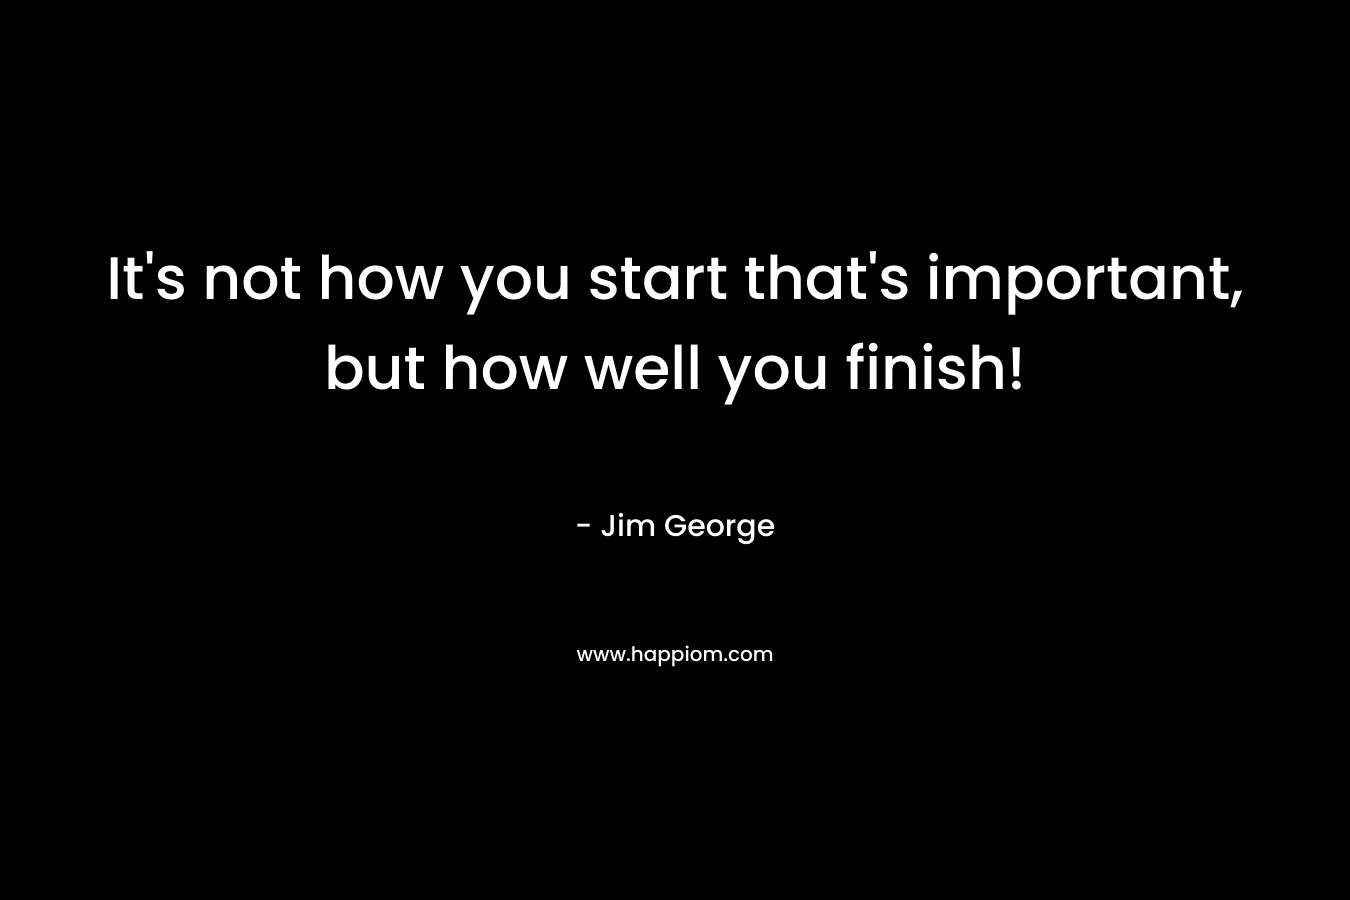 It's not how you start that's important, but how well you finish!